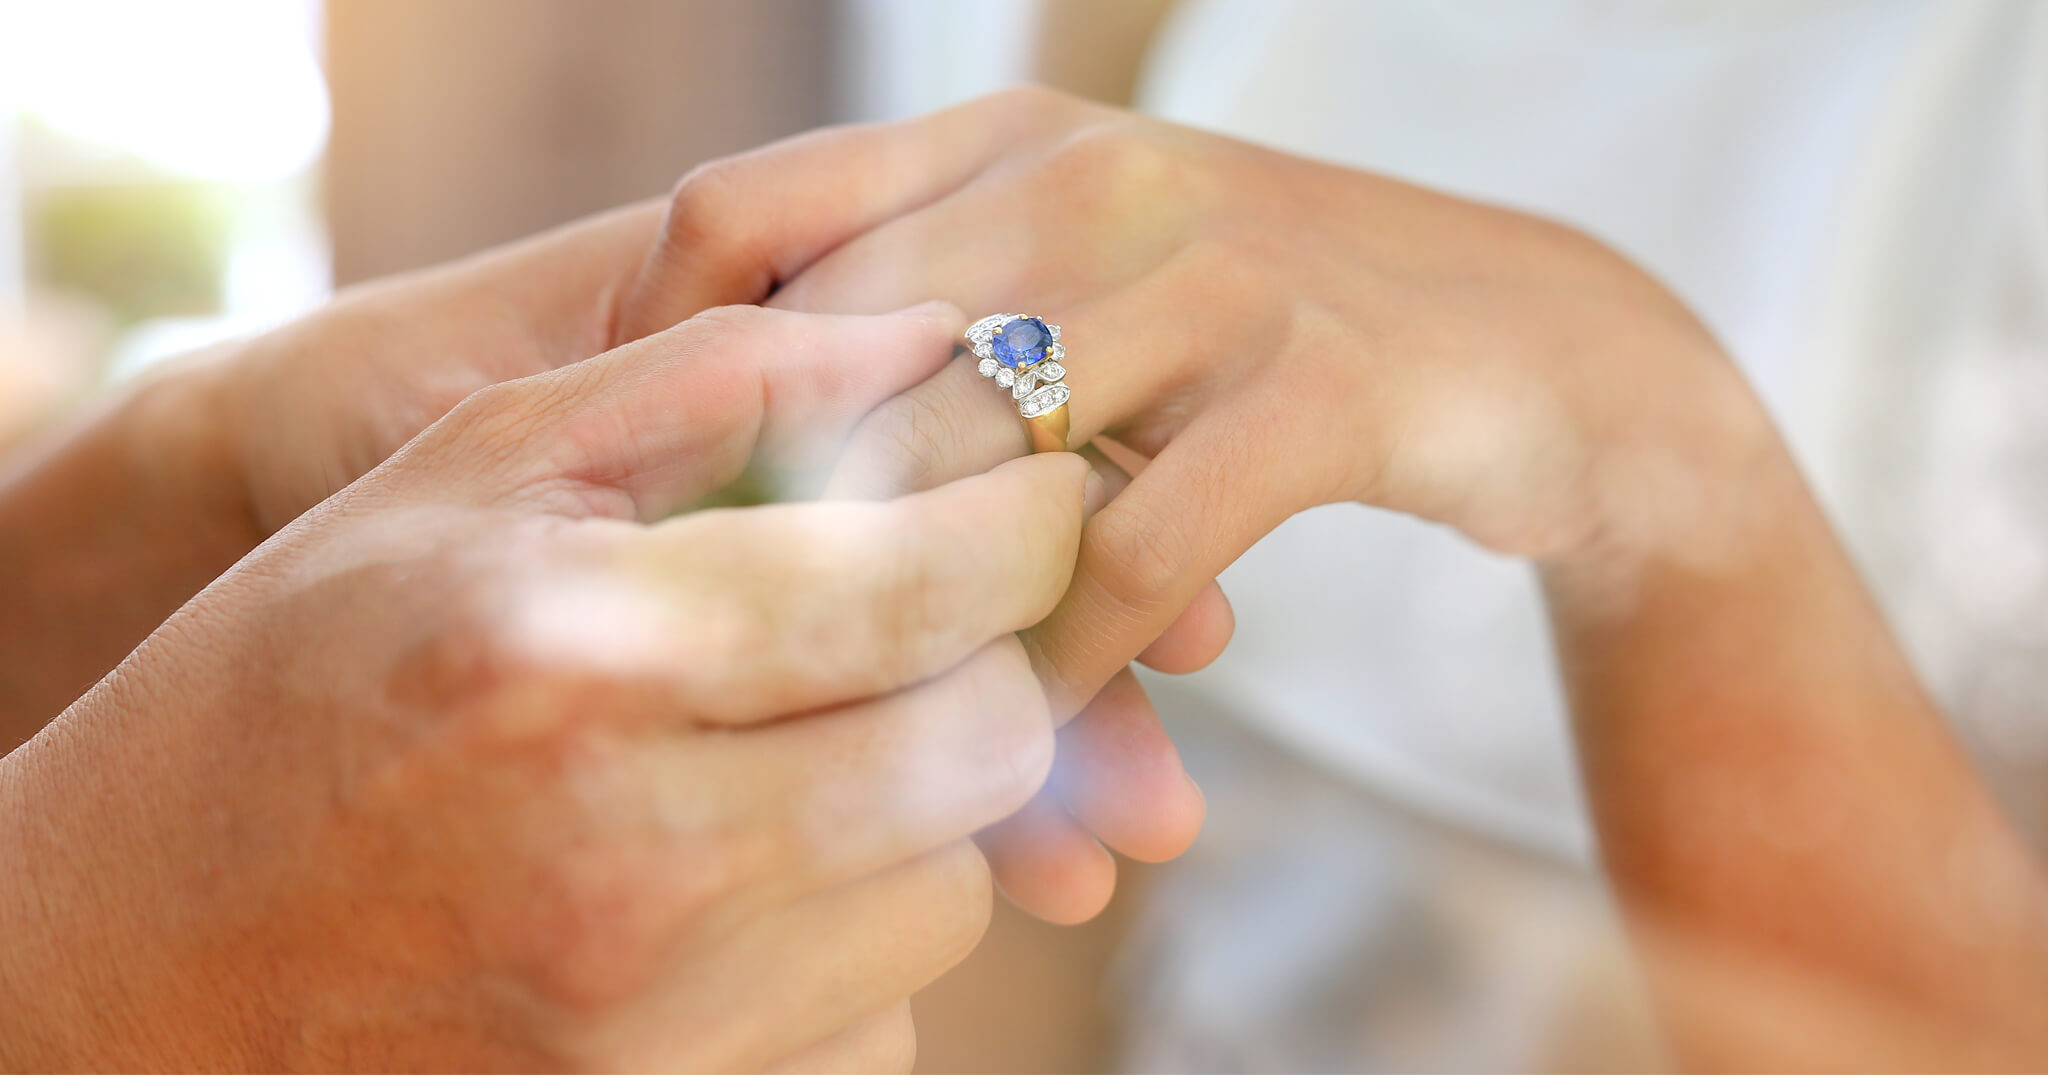 The Colored Engagement Rings Option You May Not Have Considered